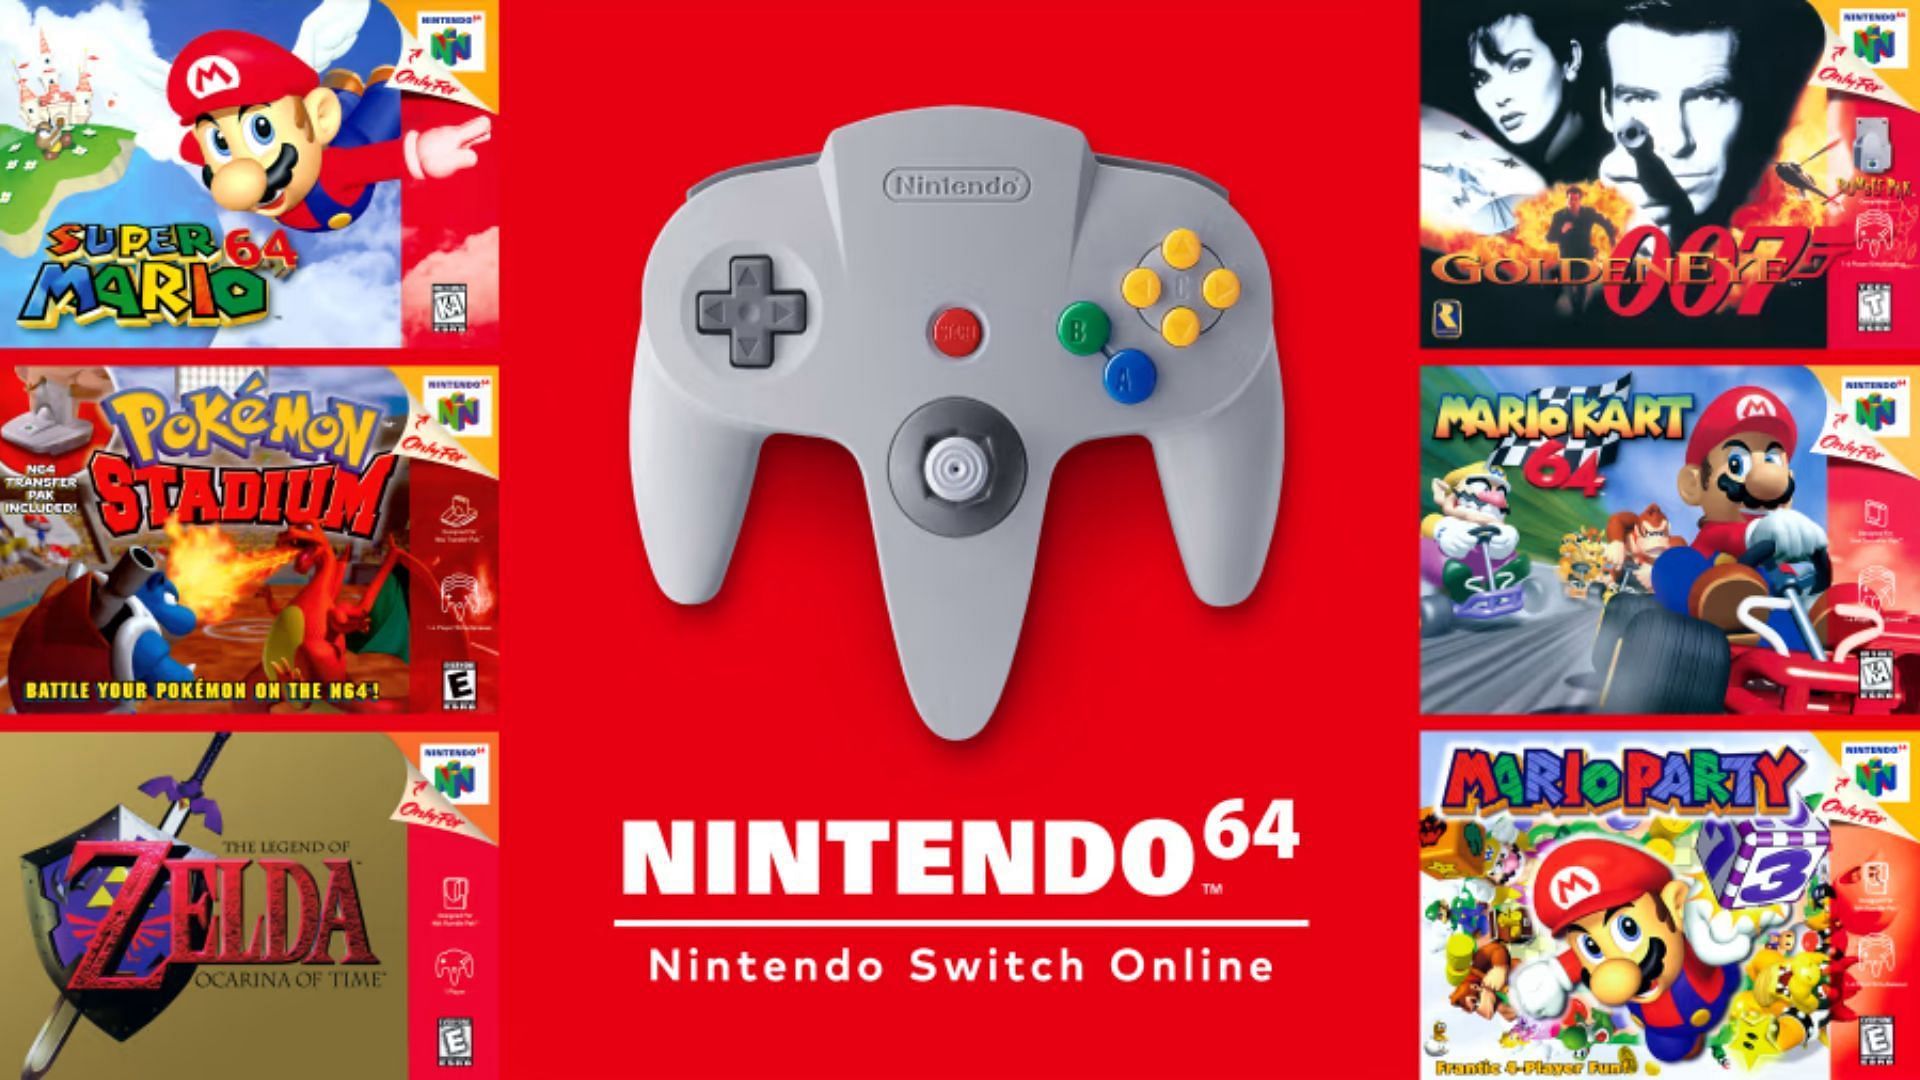 Nintendo offers beloved classic titles and much online features with its NSO membership. (Image via Nintendo)